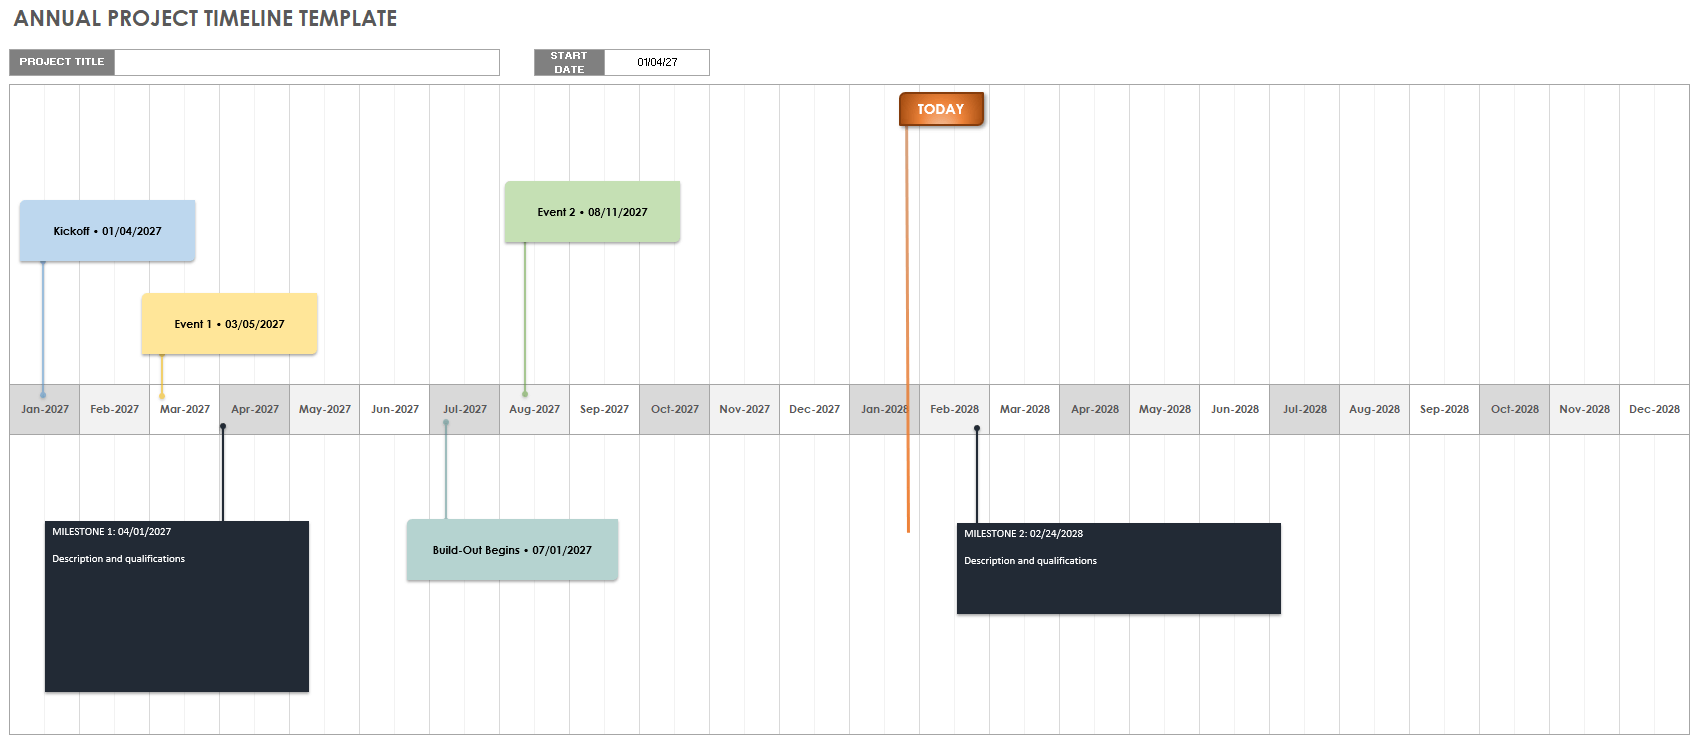 Annual Project Timeline Template